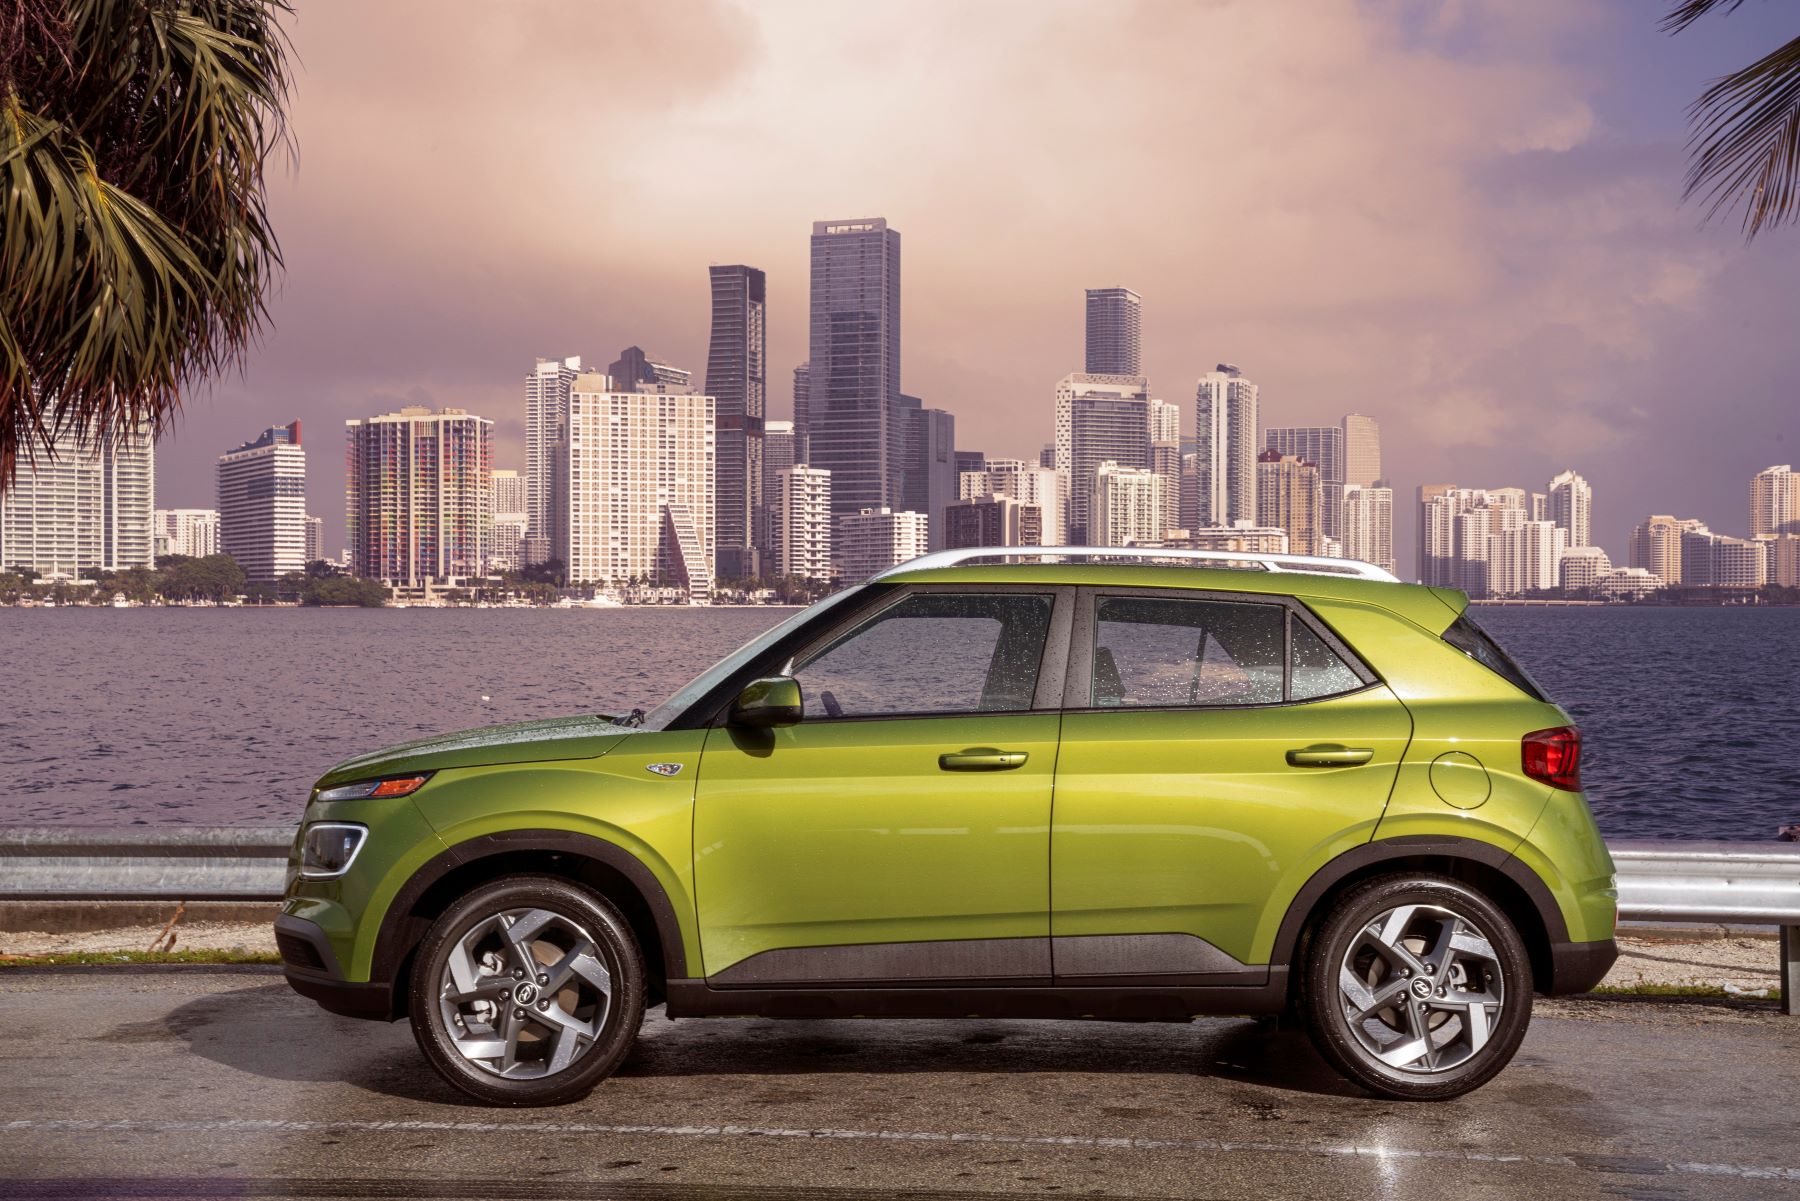 Side shot of green 2022 Hyundai Venue subcompact SUV model parked by water with skyline background